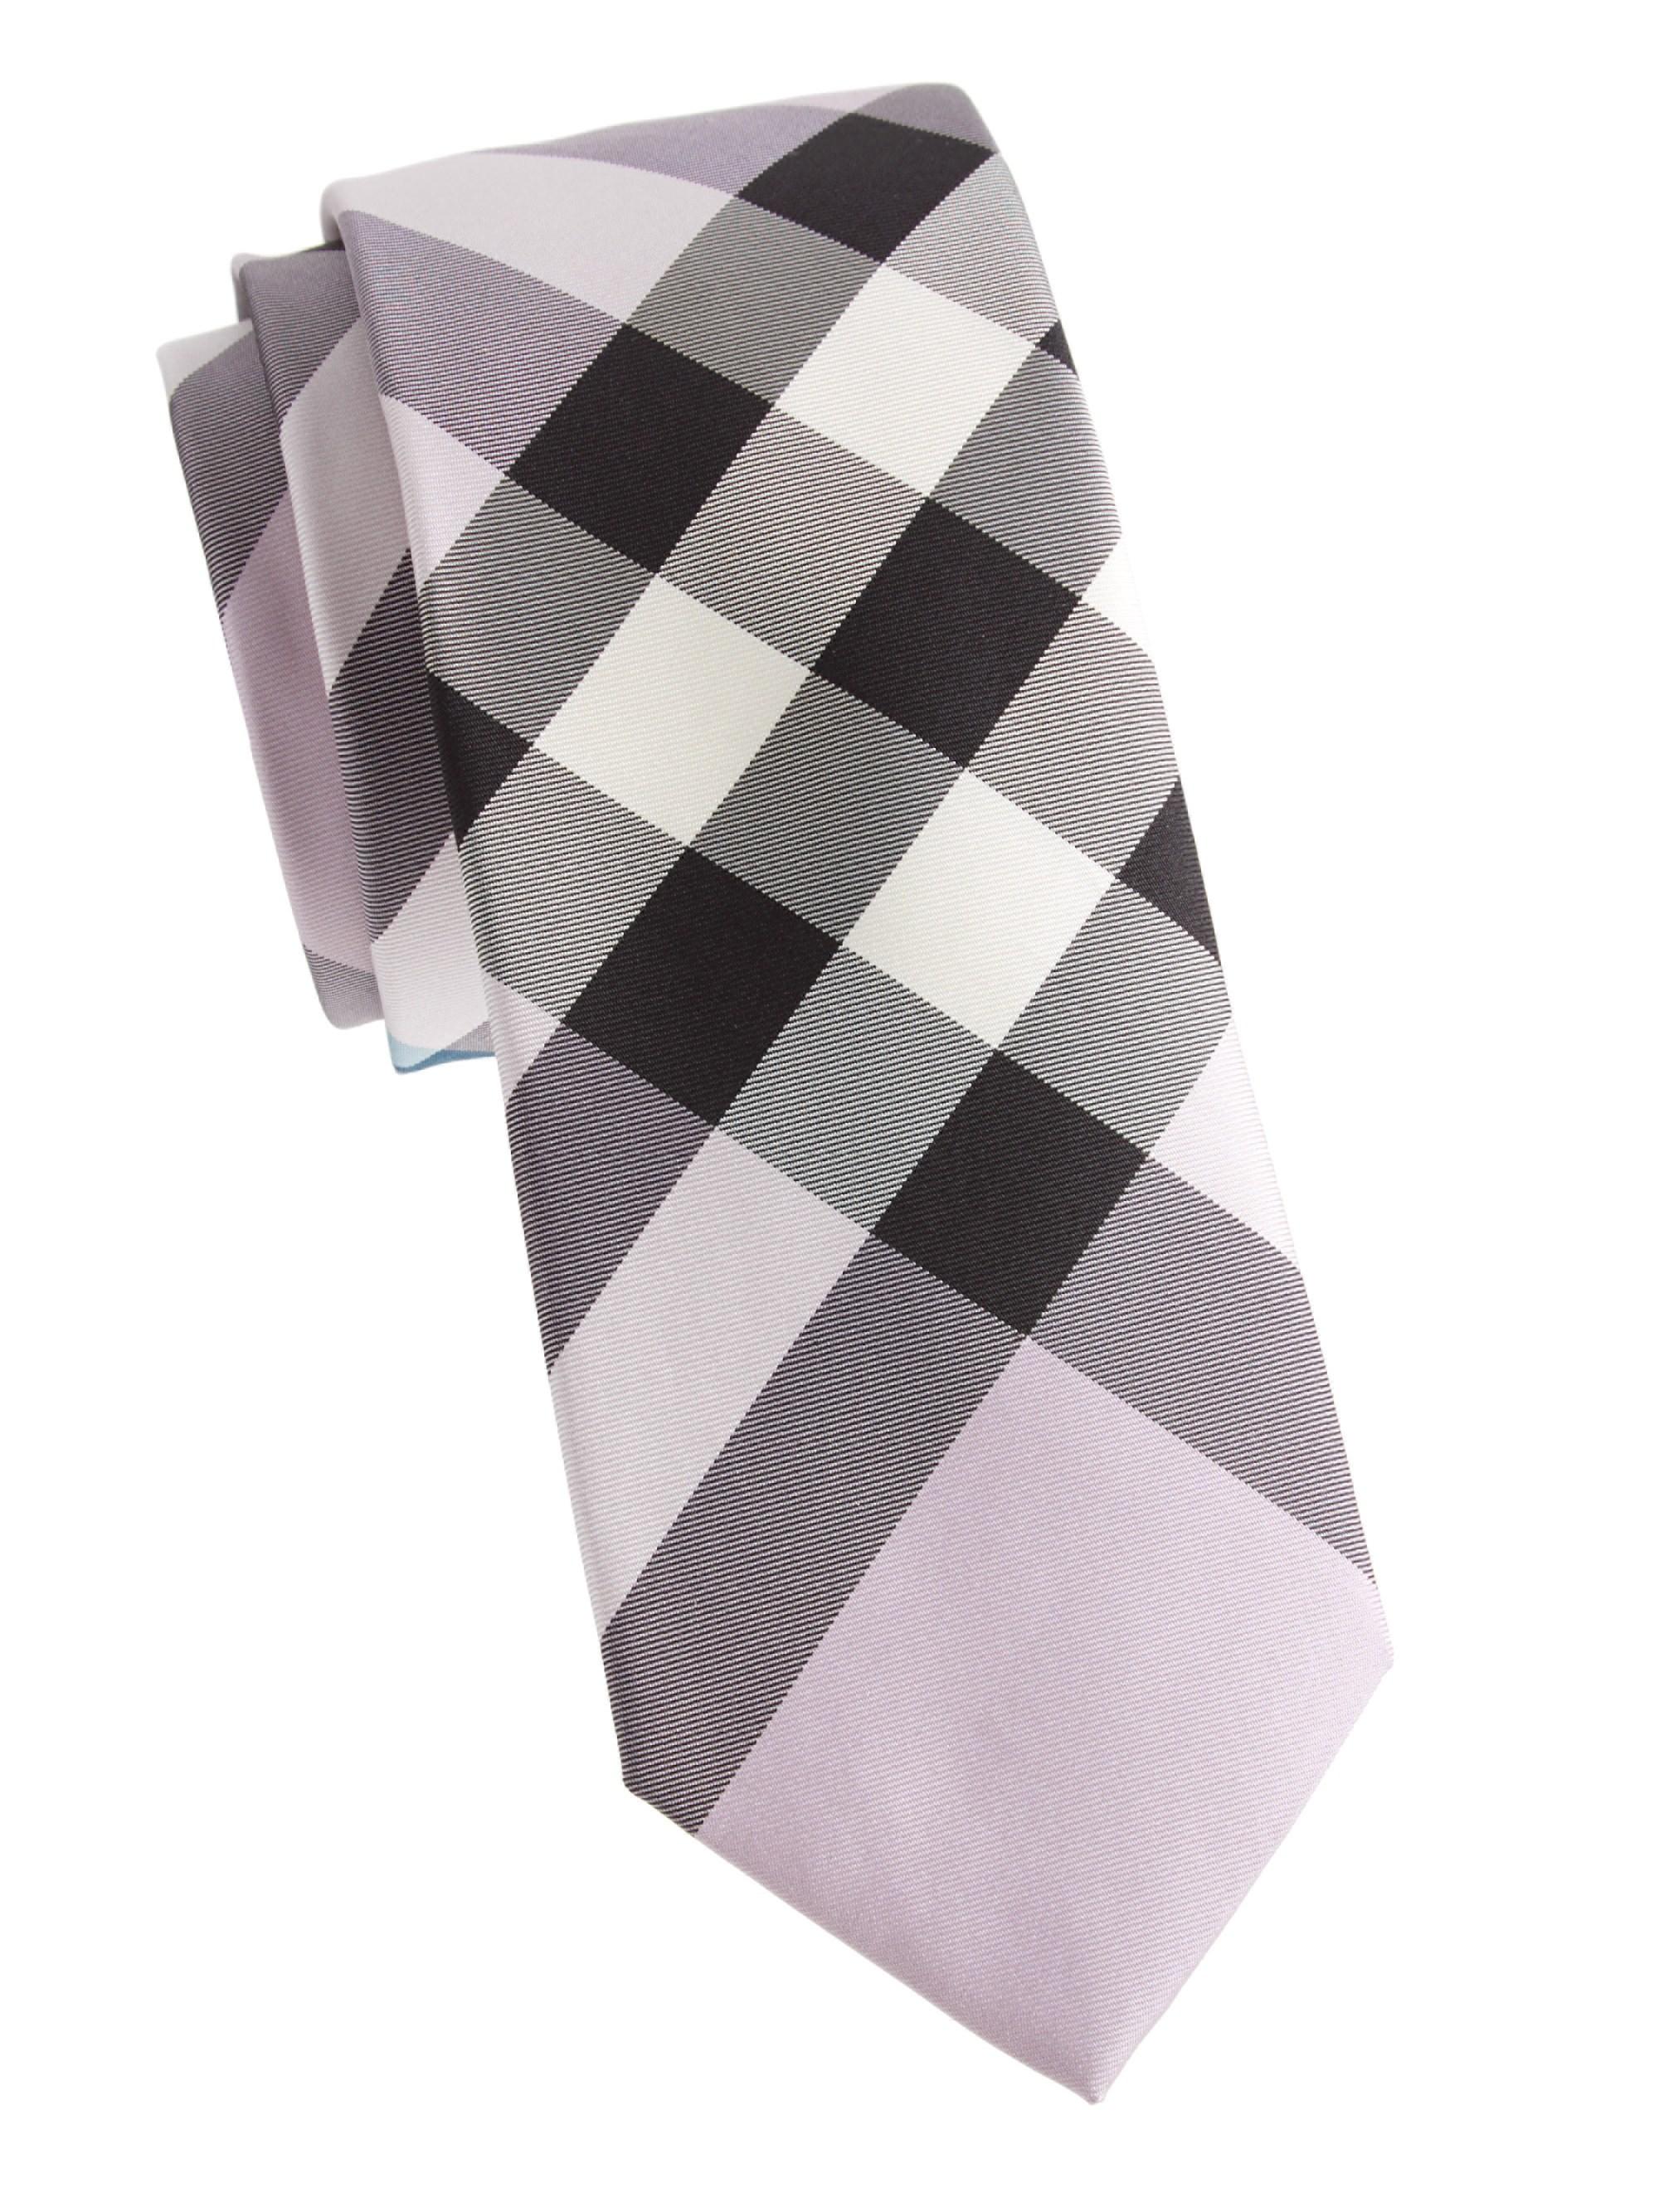 Burberry Exploded Check Mulberry Silk Tie in Lilac (Purple) for Men - Lyst